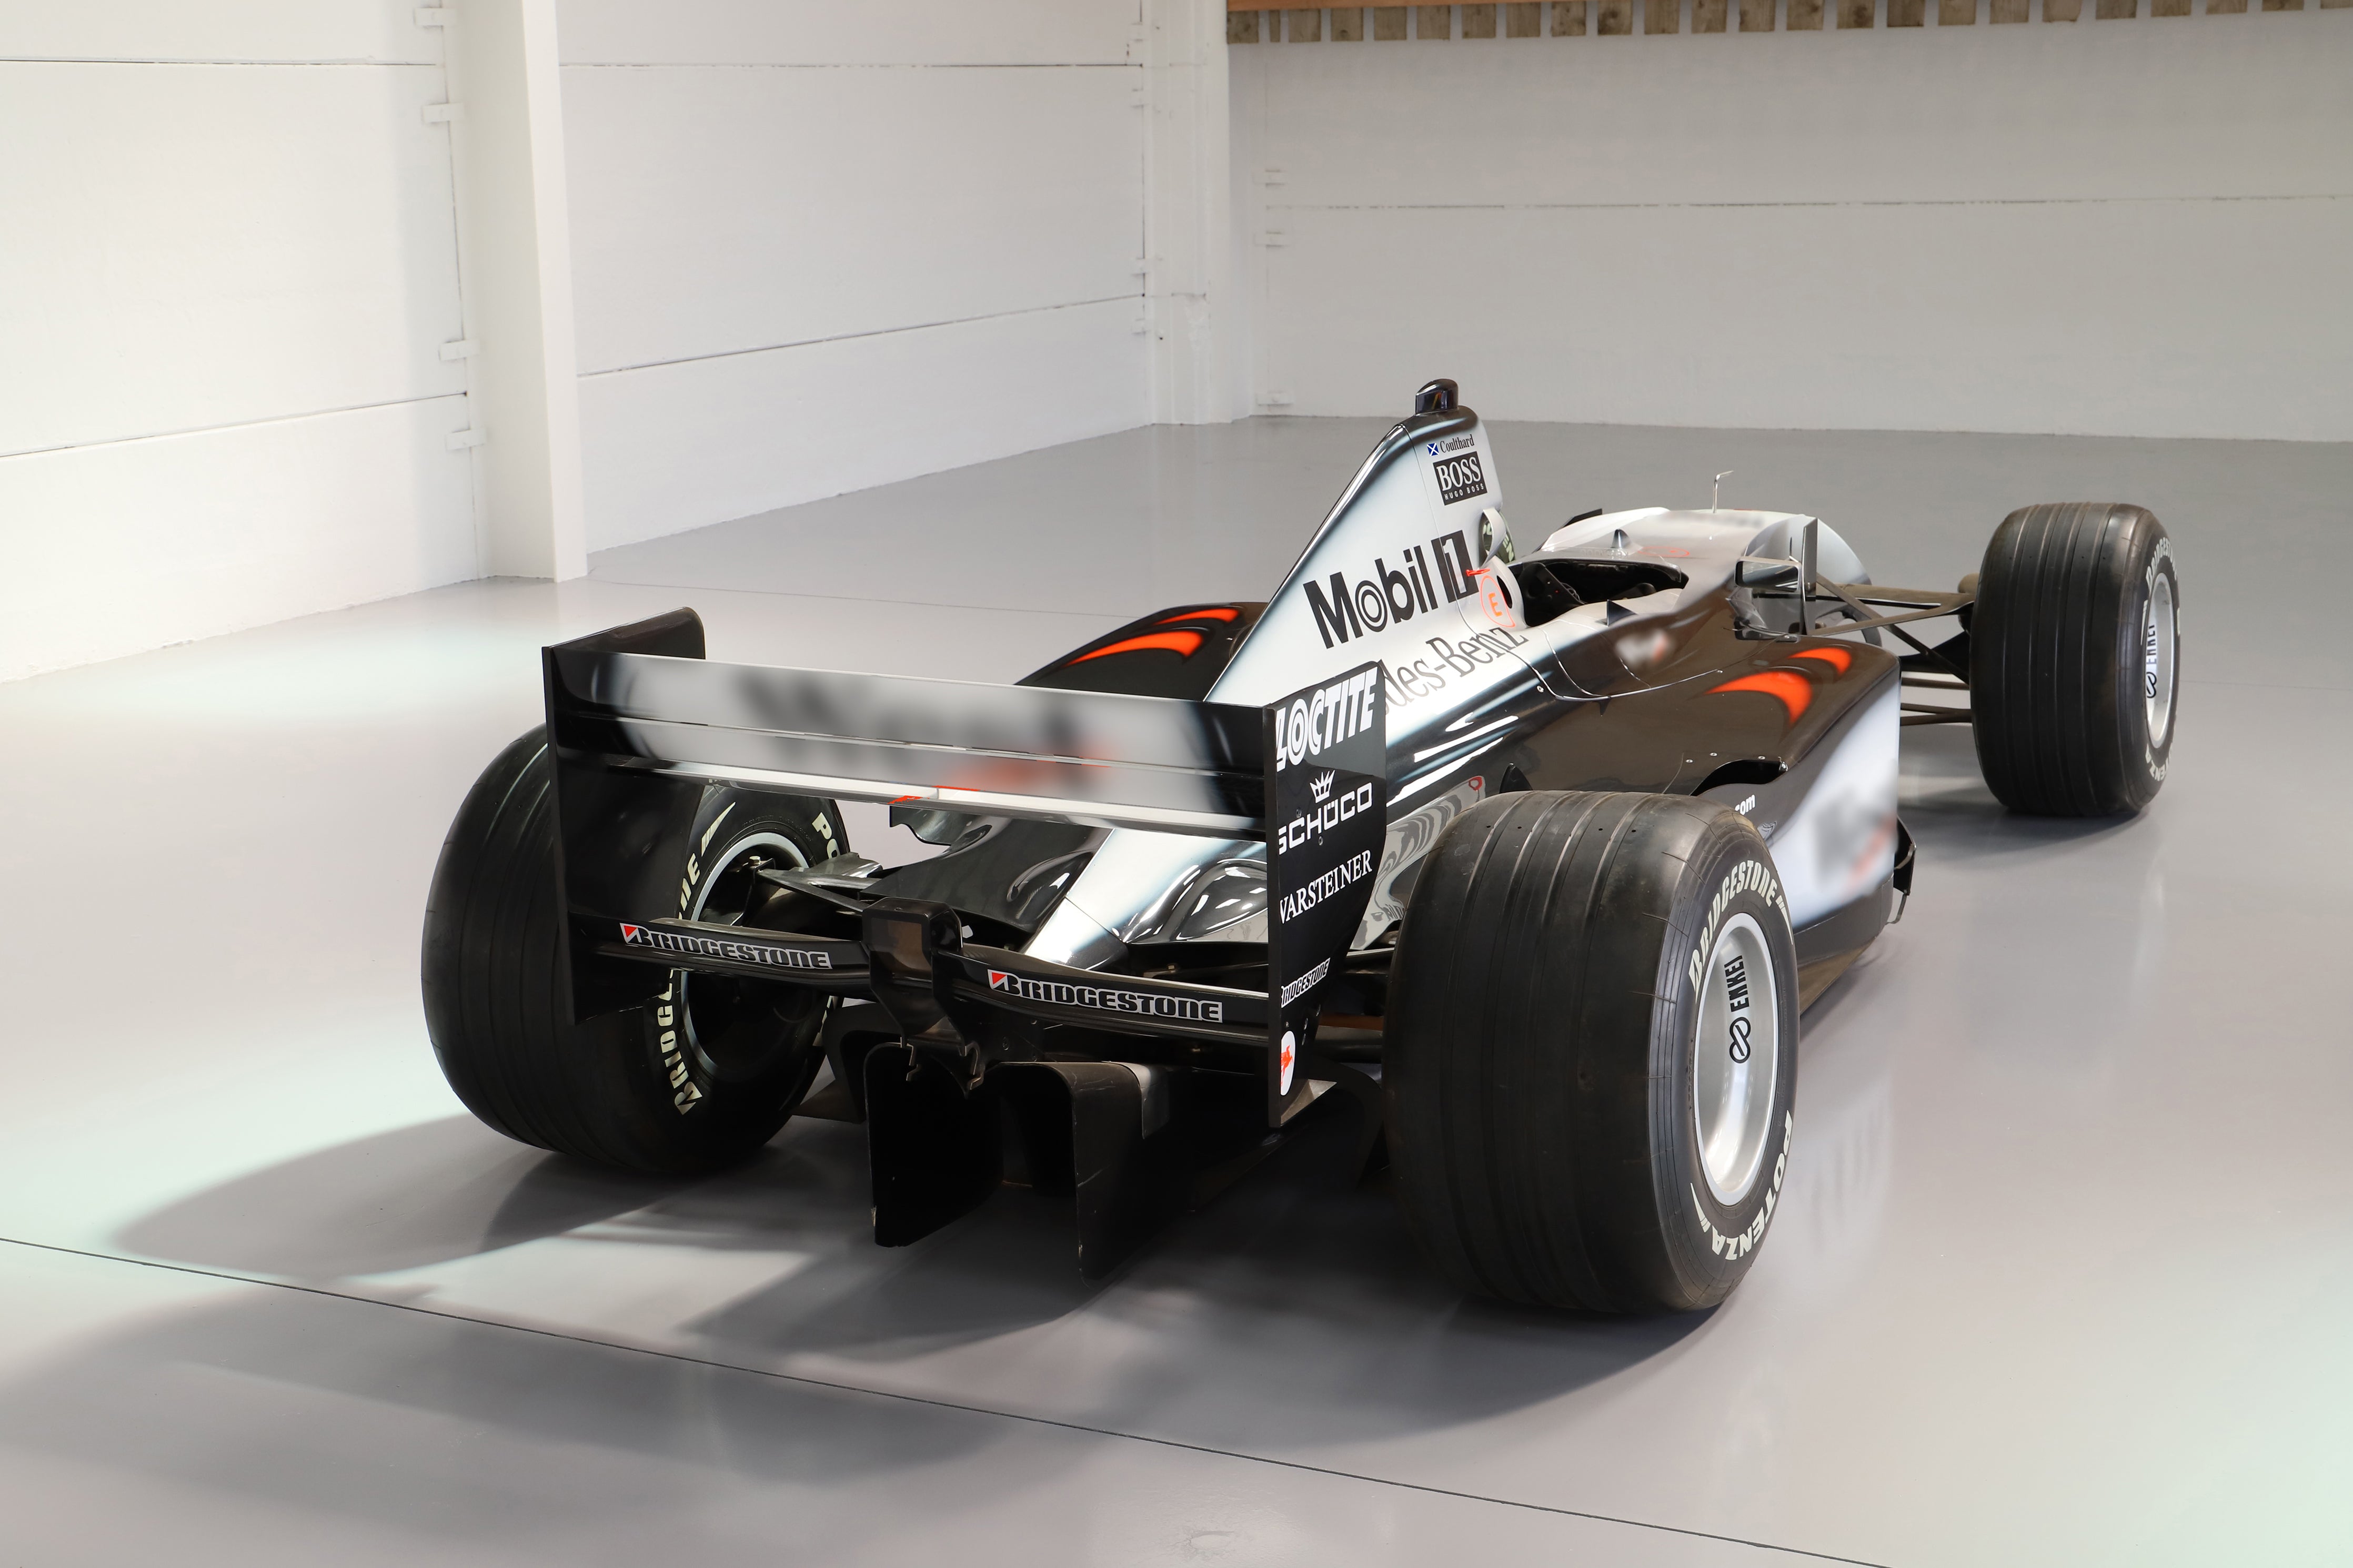 Displaying a Real McLaren Formula 1 Car is One Way to Win a